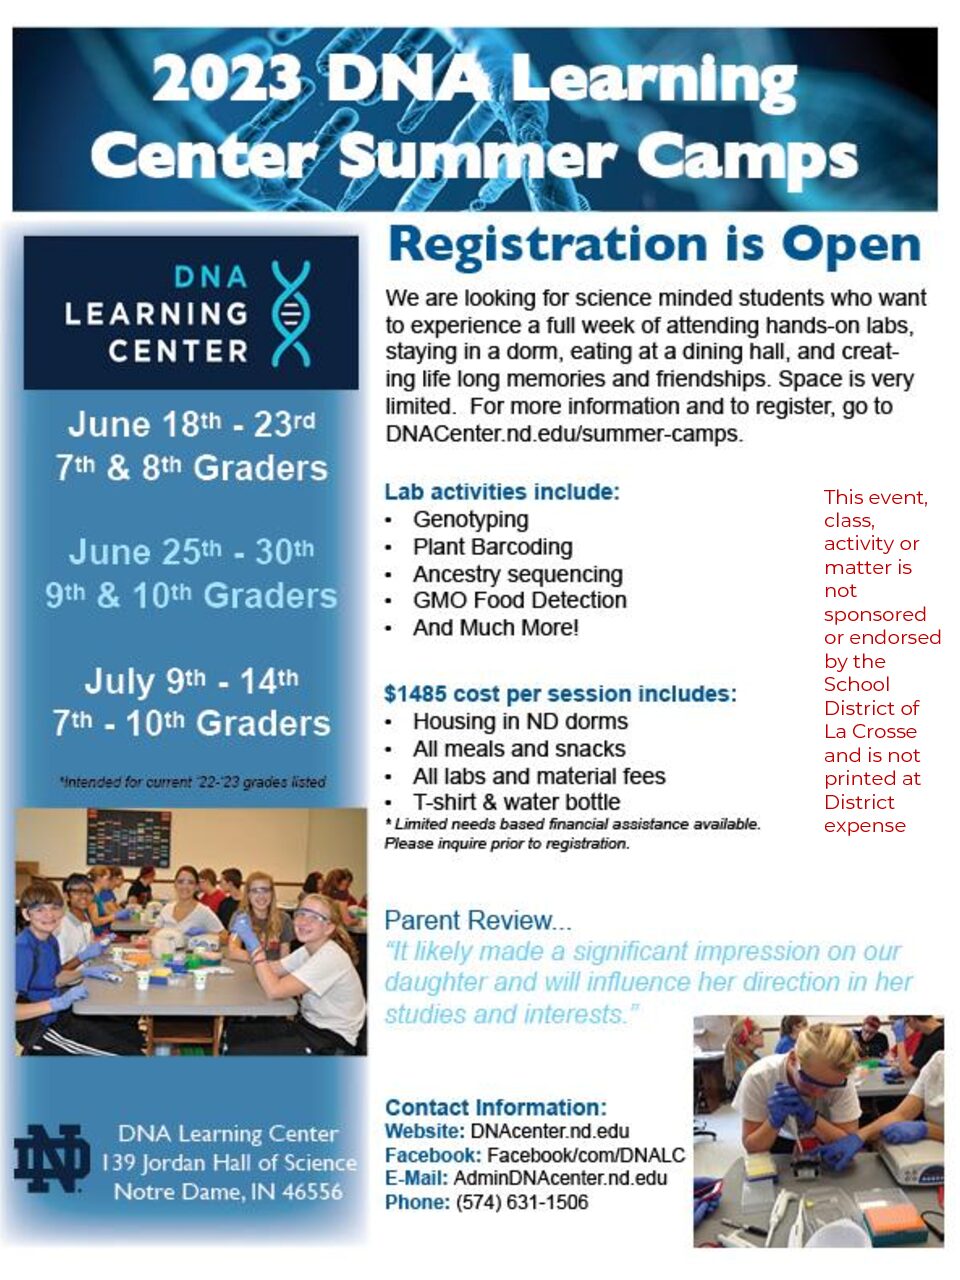 DNA Learning Center Summer Camps 2023